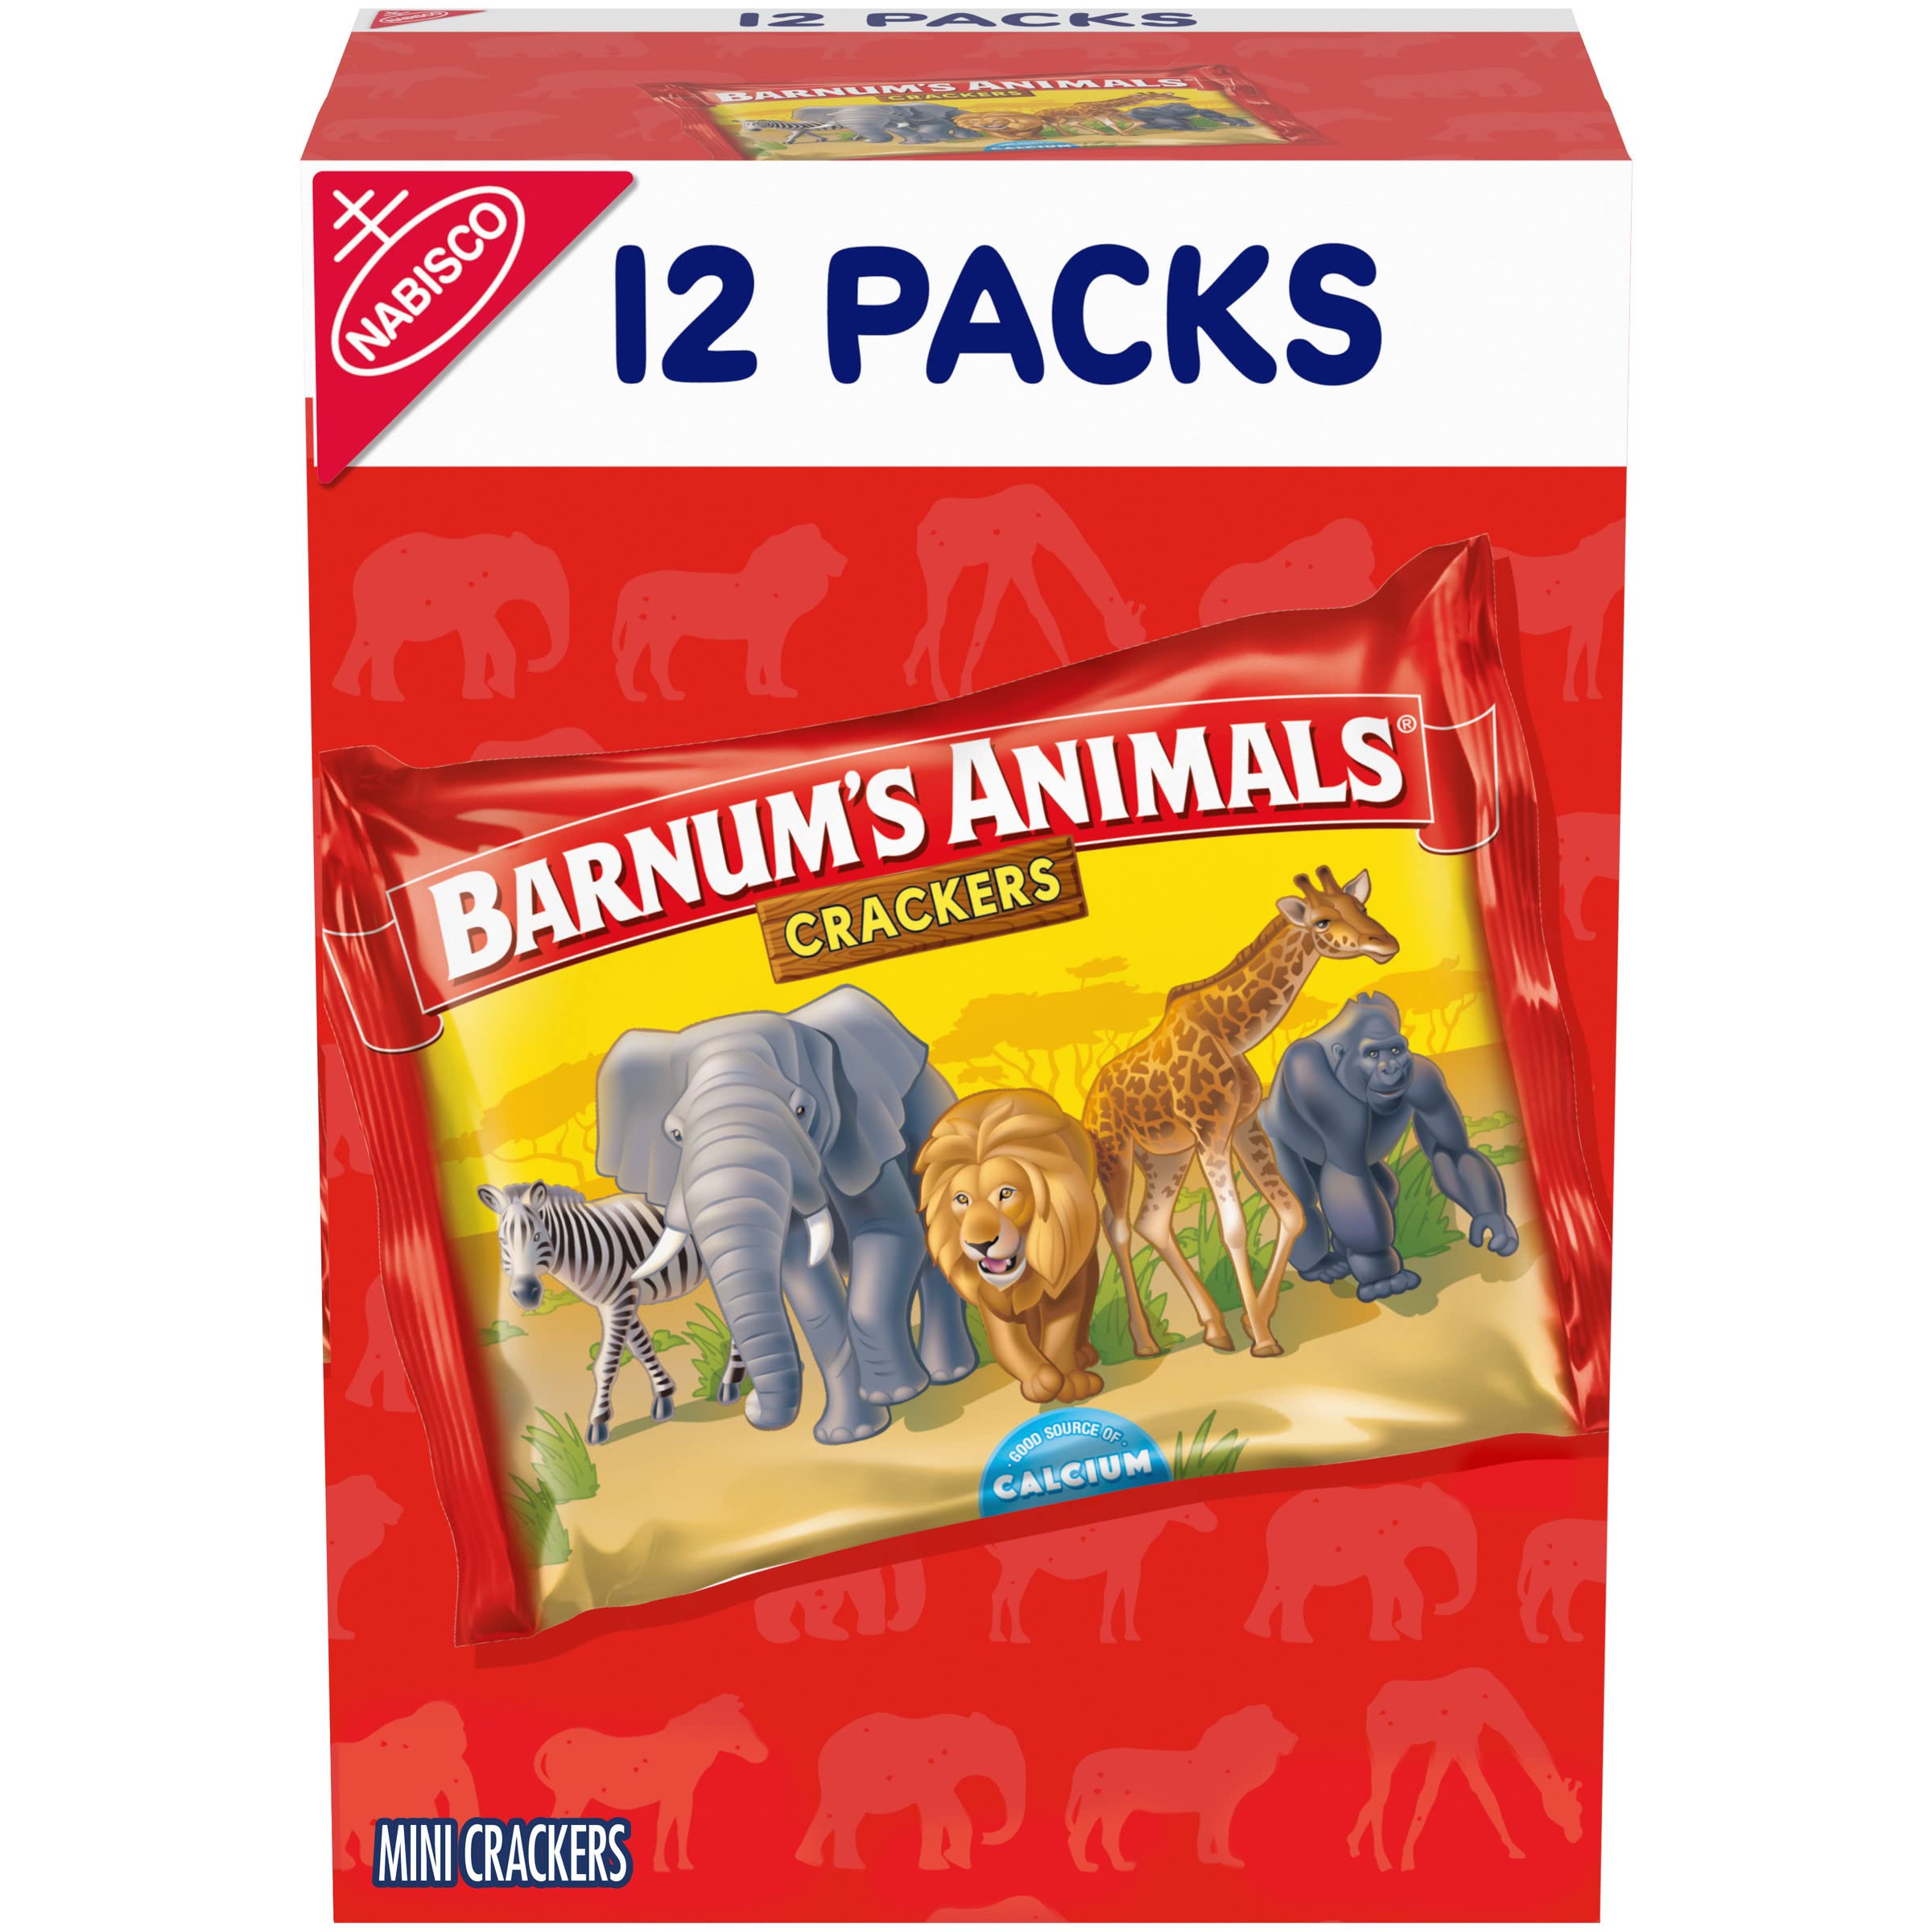 12-Packs Barnum's Original Animal Crackers Snack Packs $3.76 ($0.31 each) w/ S&S + Free Shipping w/ Prime or on $35+